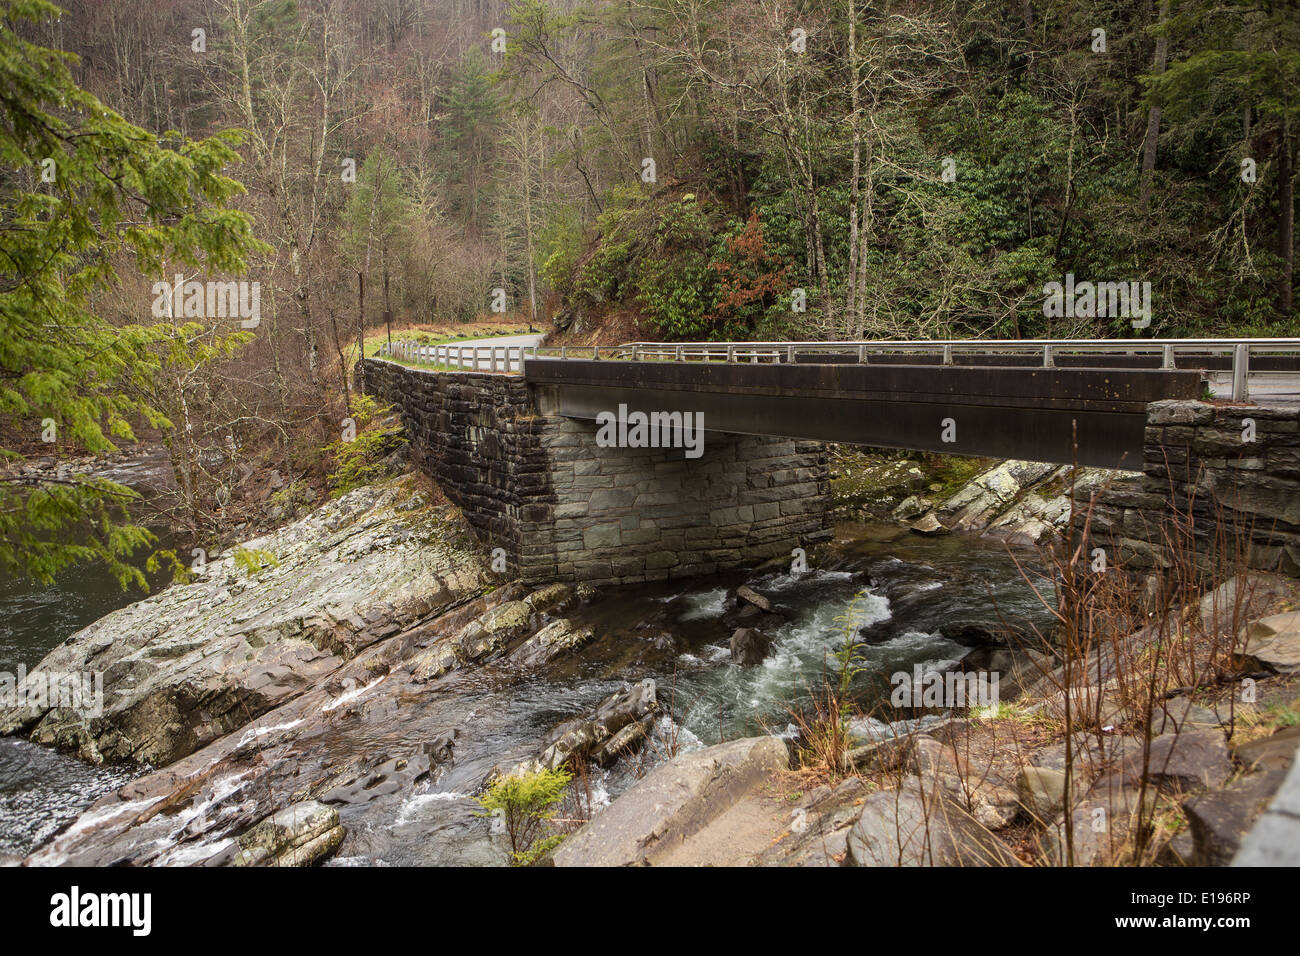 Old State Highway 73 ist im Nationalpark Great Smoky Mountains in Tennessee abgebildet. Stockfoto